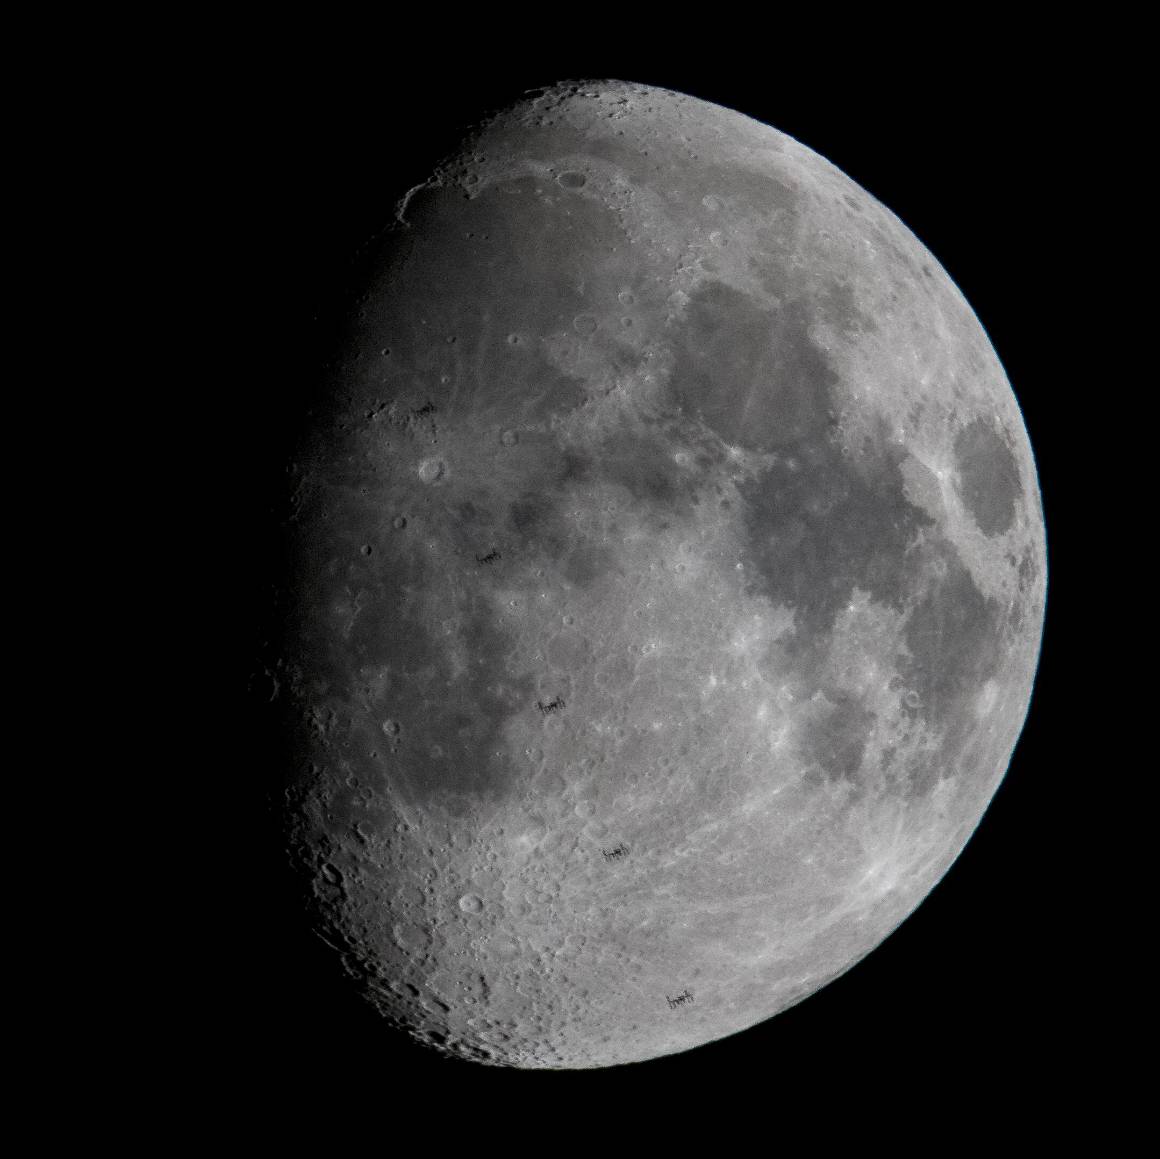 IMAGO / Zuma Wire / Joel Kowsky | A Composite image, made from five frames, shows the International Space Station as it transits the Moon at roughly five miles per second from Chantilly, Virginia. March 16, 2019.